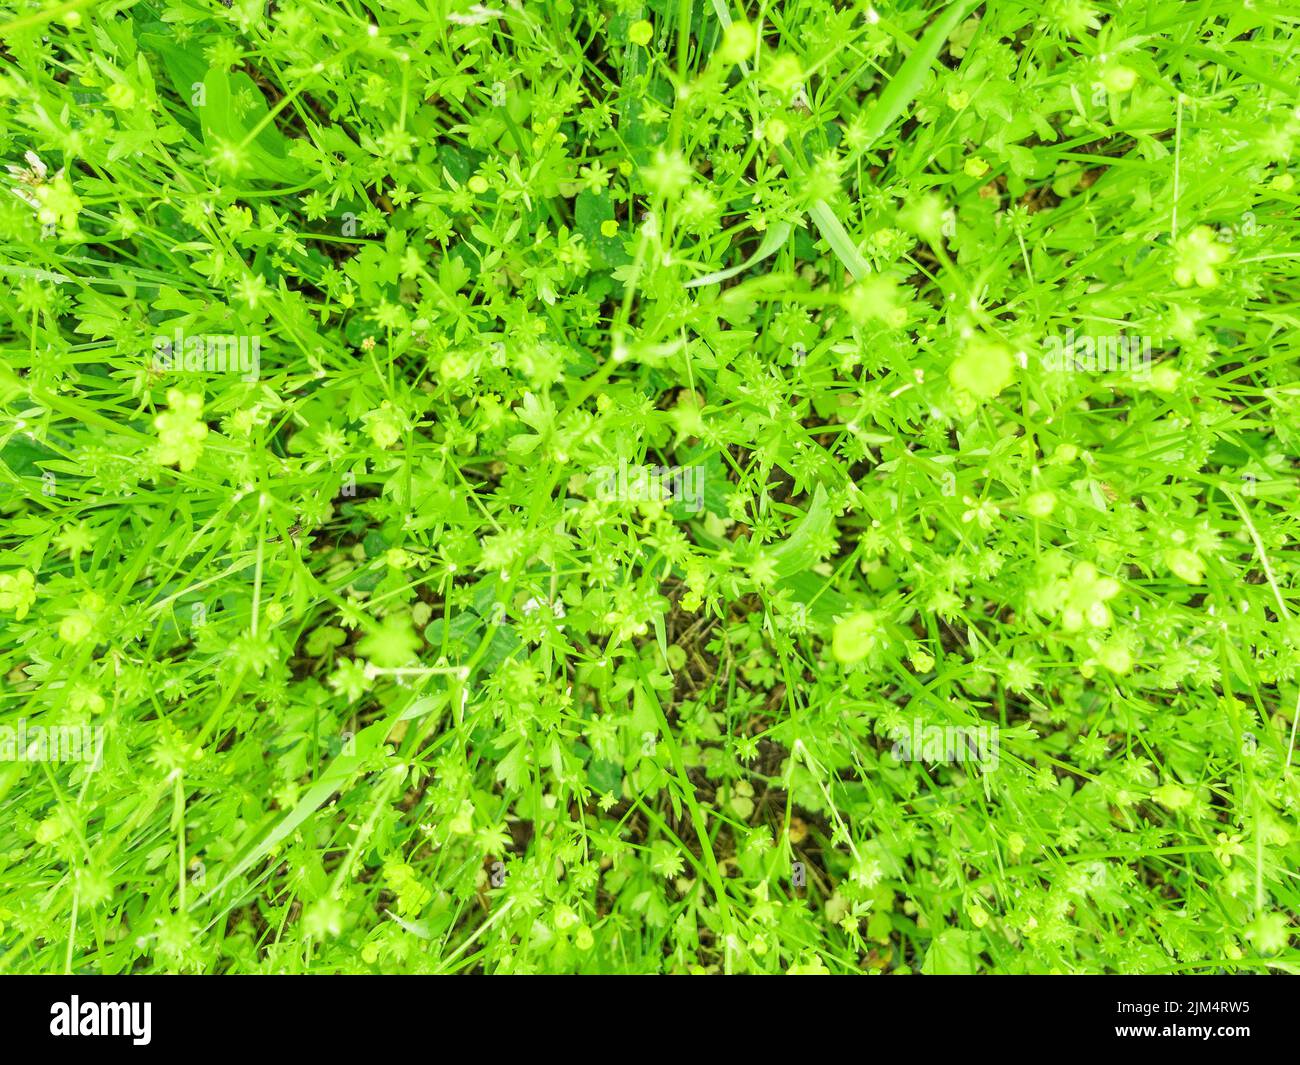 Fresh spring grass as a background with a full-screen view from above Stock Photo